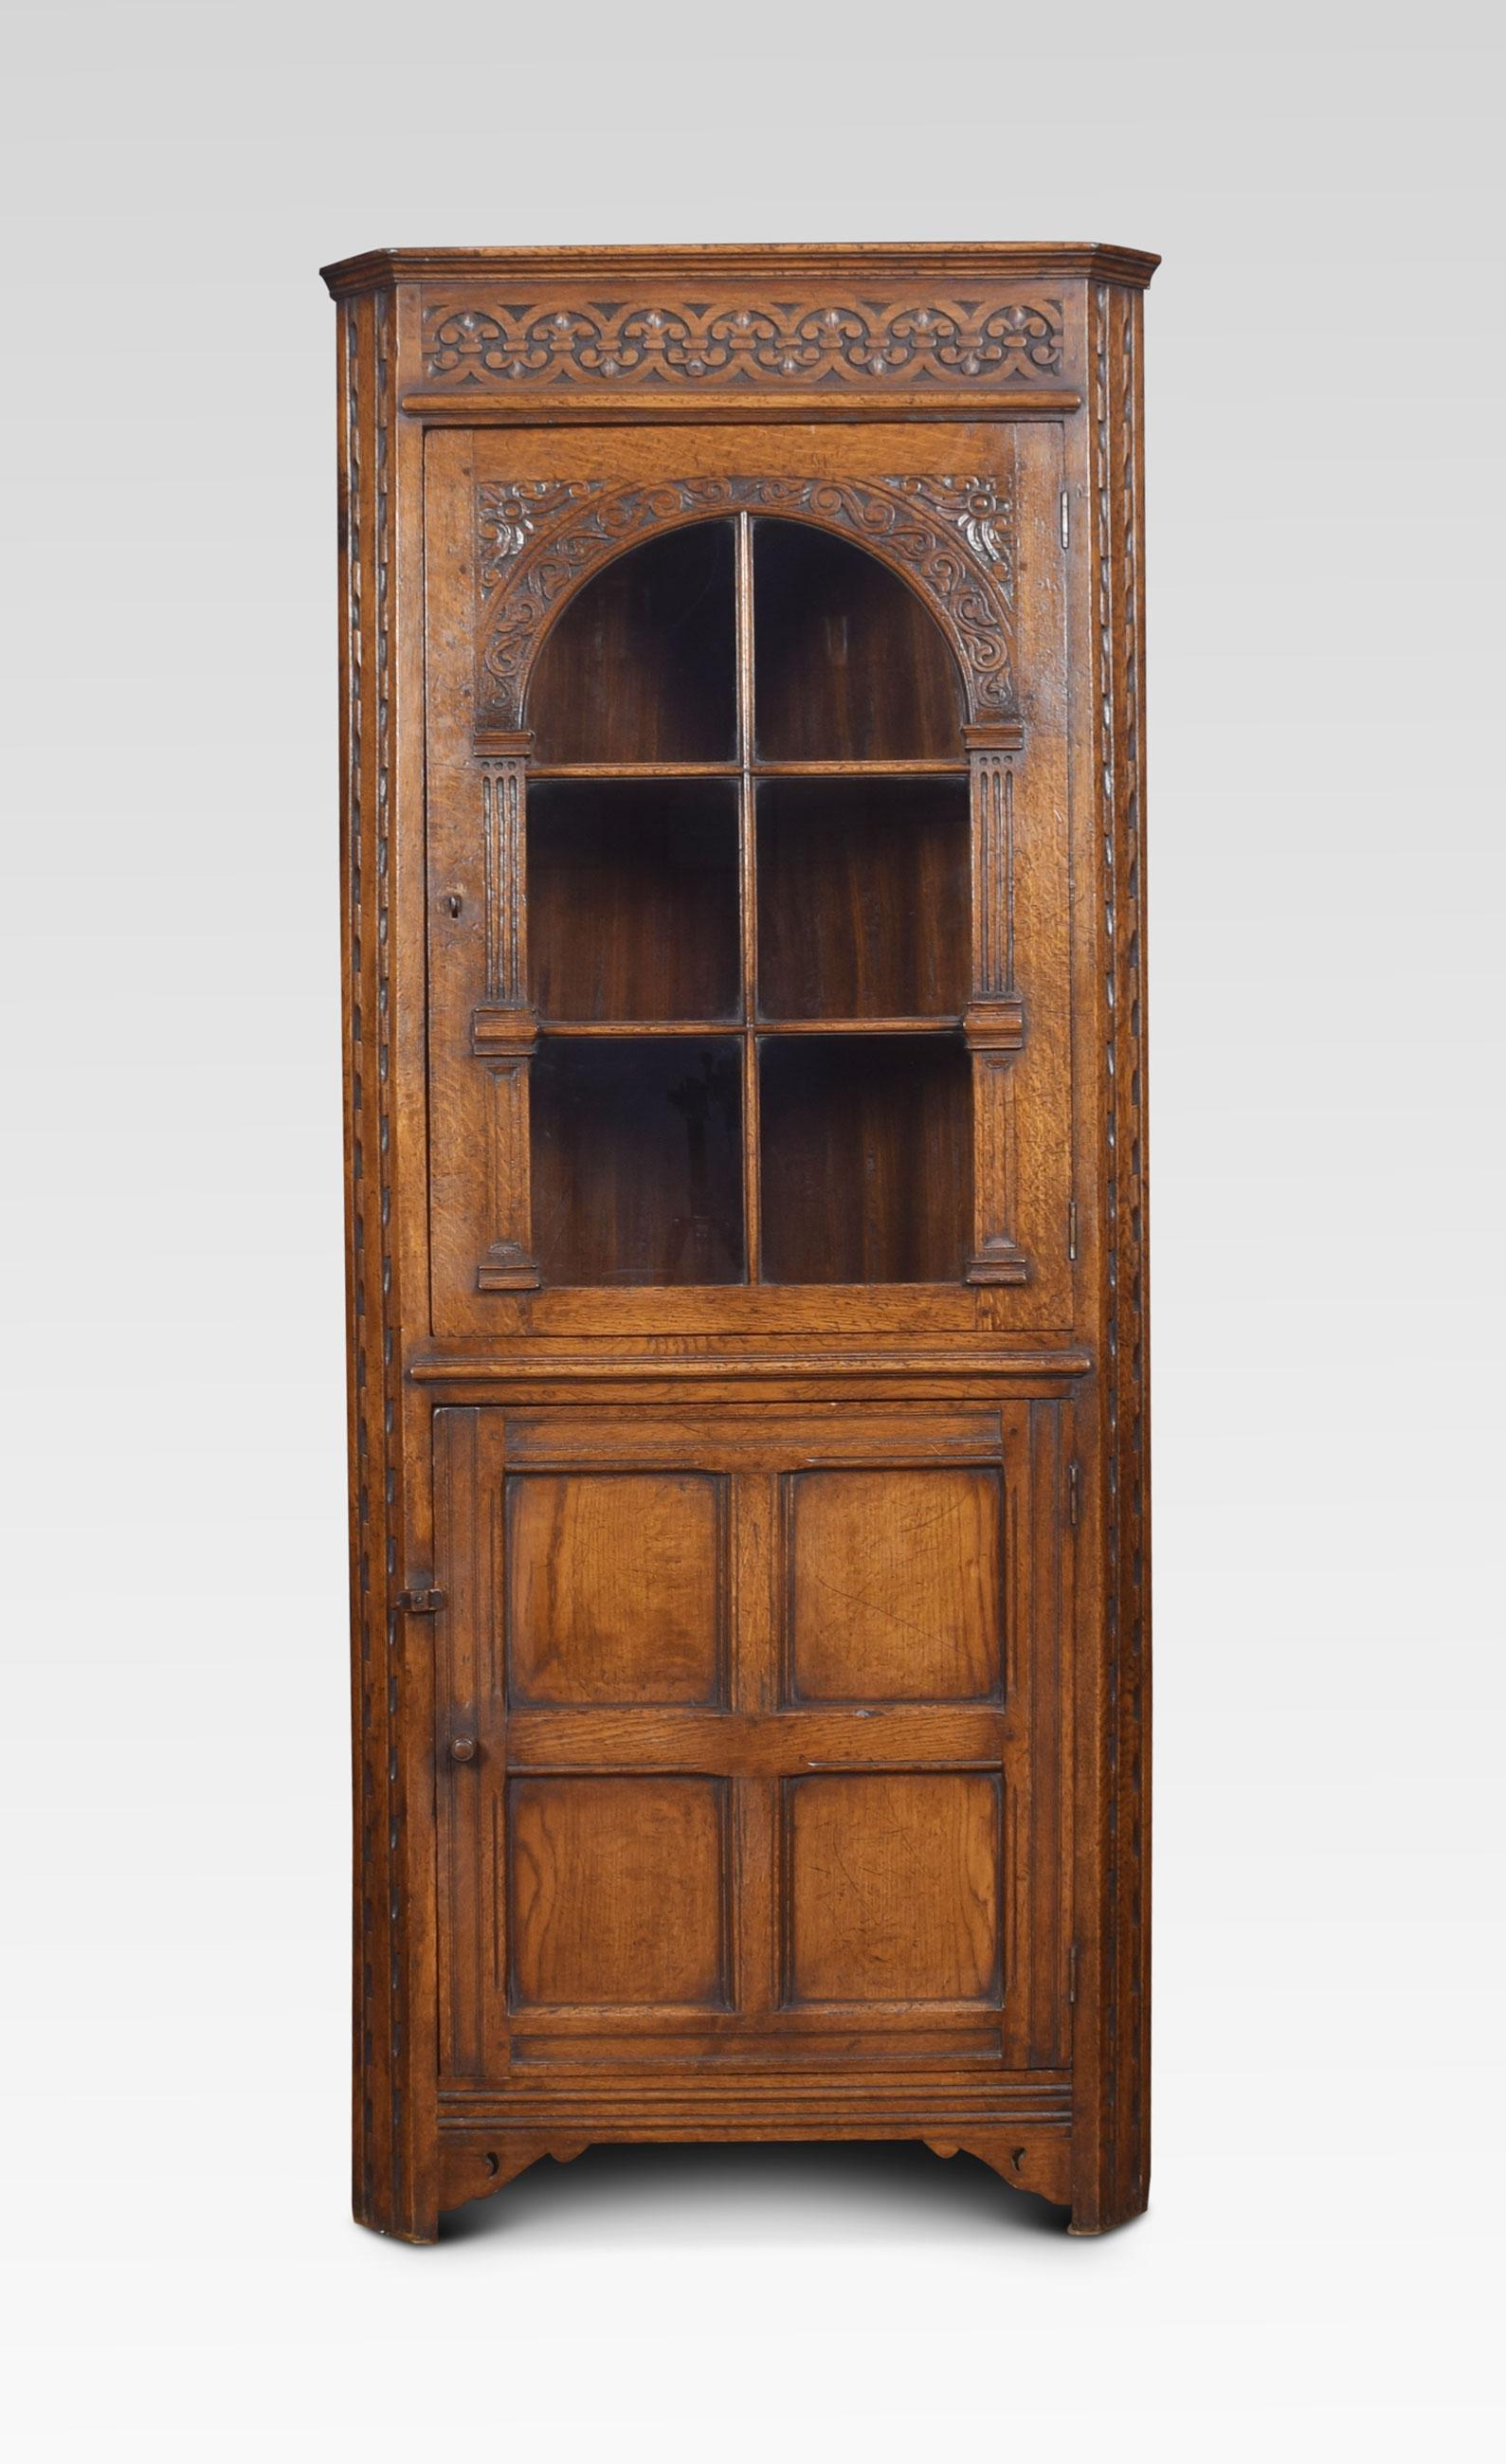 Oak corner display cabinet, the carved arched frieze to the glazed door opening to reveal the shelved interior. The base section fitted with panel door all raised up on block feet.
Dimensions:
Height 72 inches
Width 30 inches
Depth 20 inches.